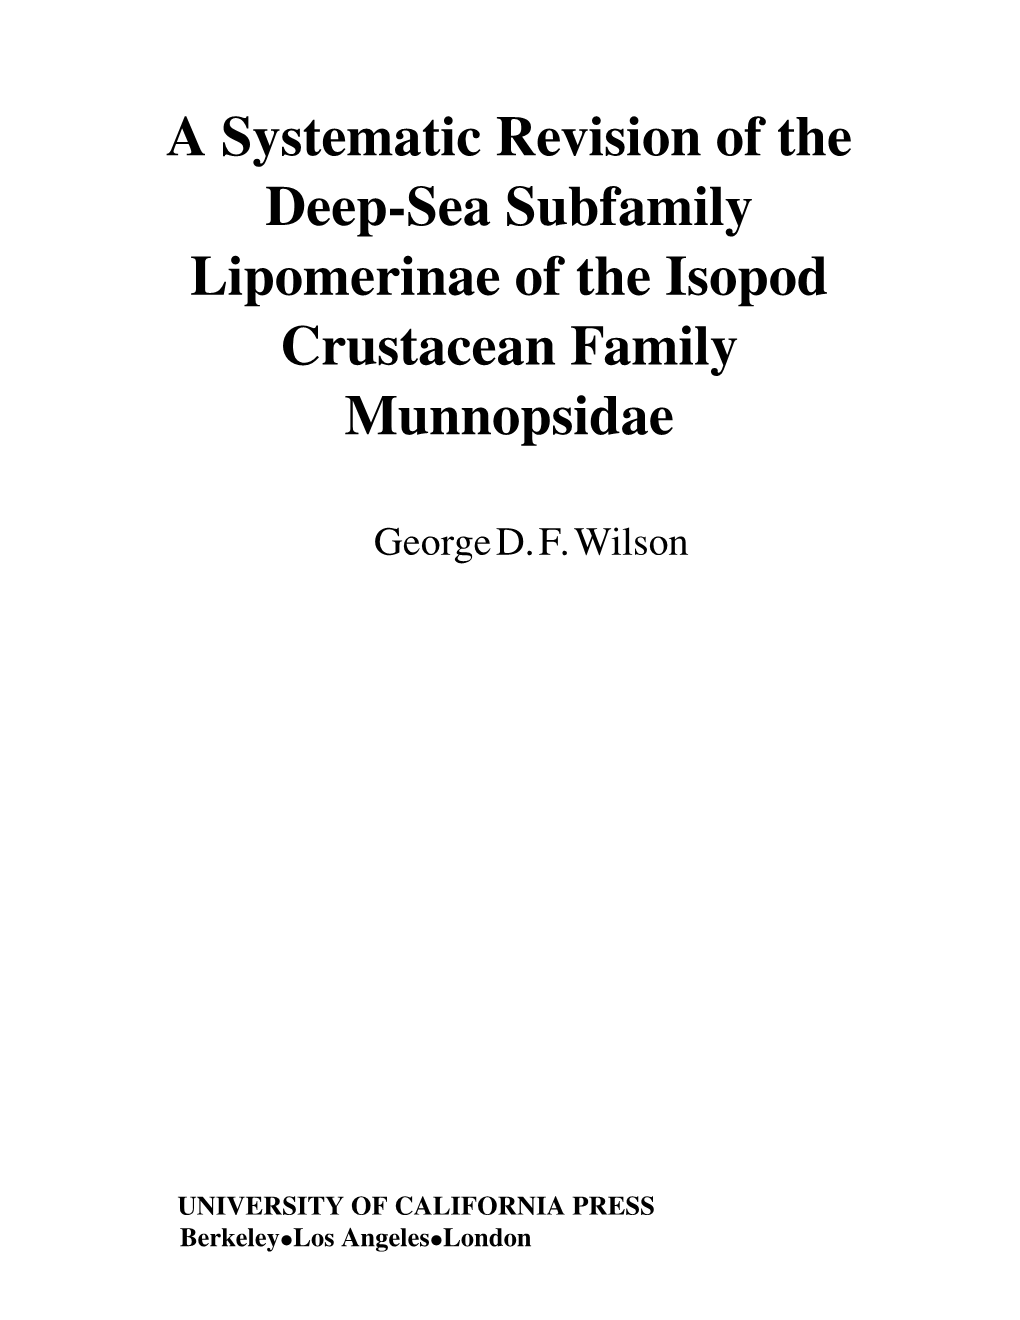 A Systematic Revision of the Deep-Sea Subfamily Lipomerinae of the Isopod Crustacean Family Munnopsidae